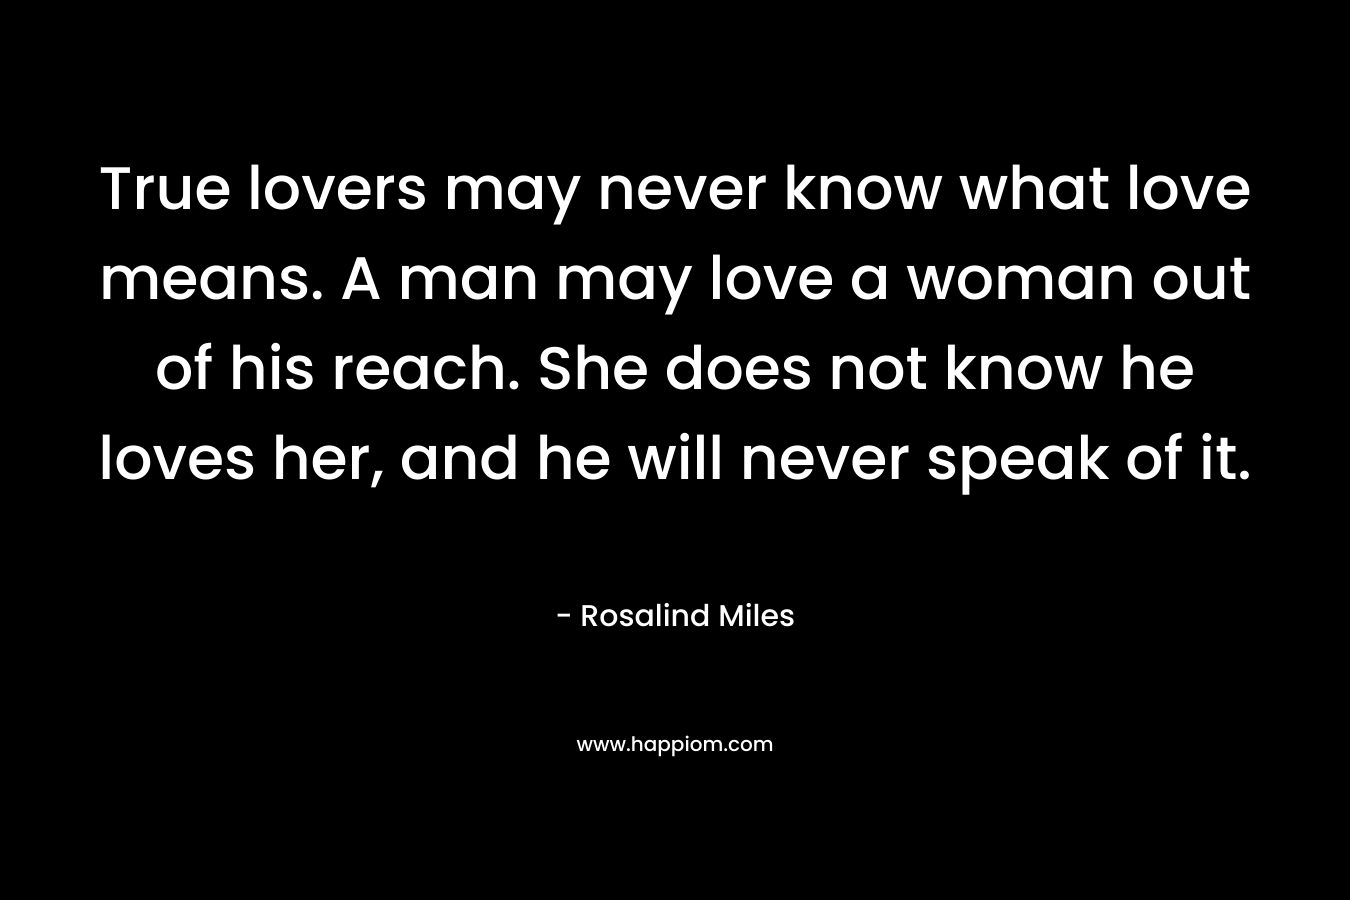 True lovers may never know what love means. A man may love a woman out of his reach. She does not know he loves her, and he will never speak of it.